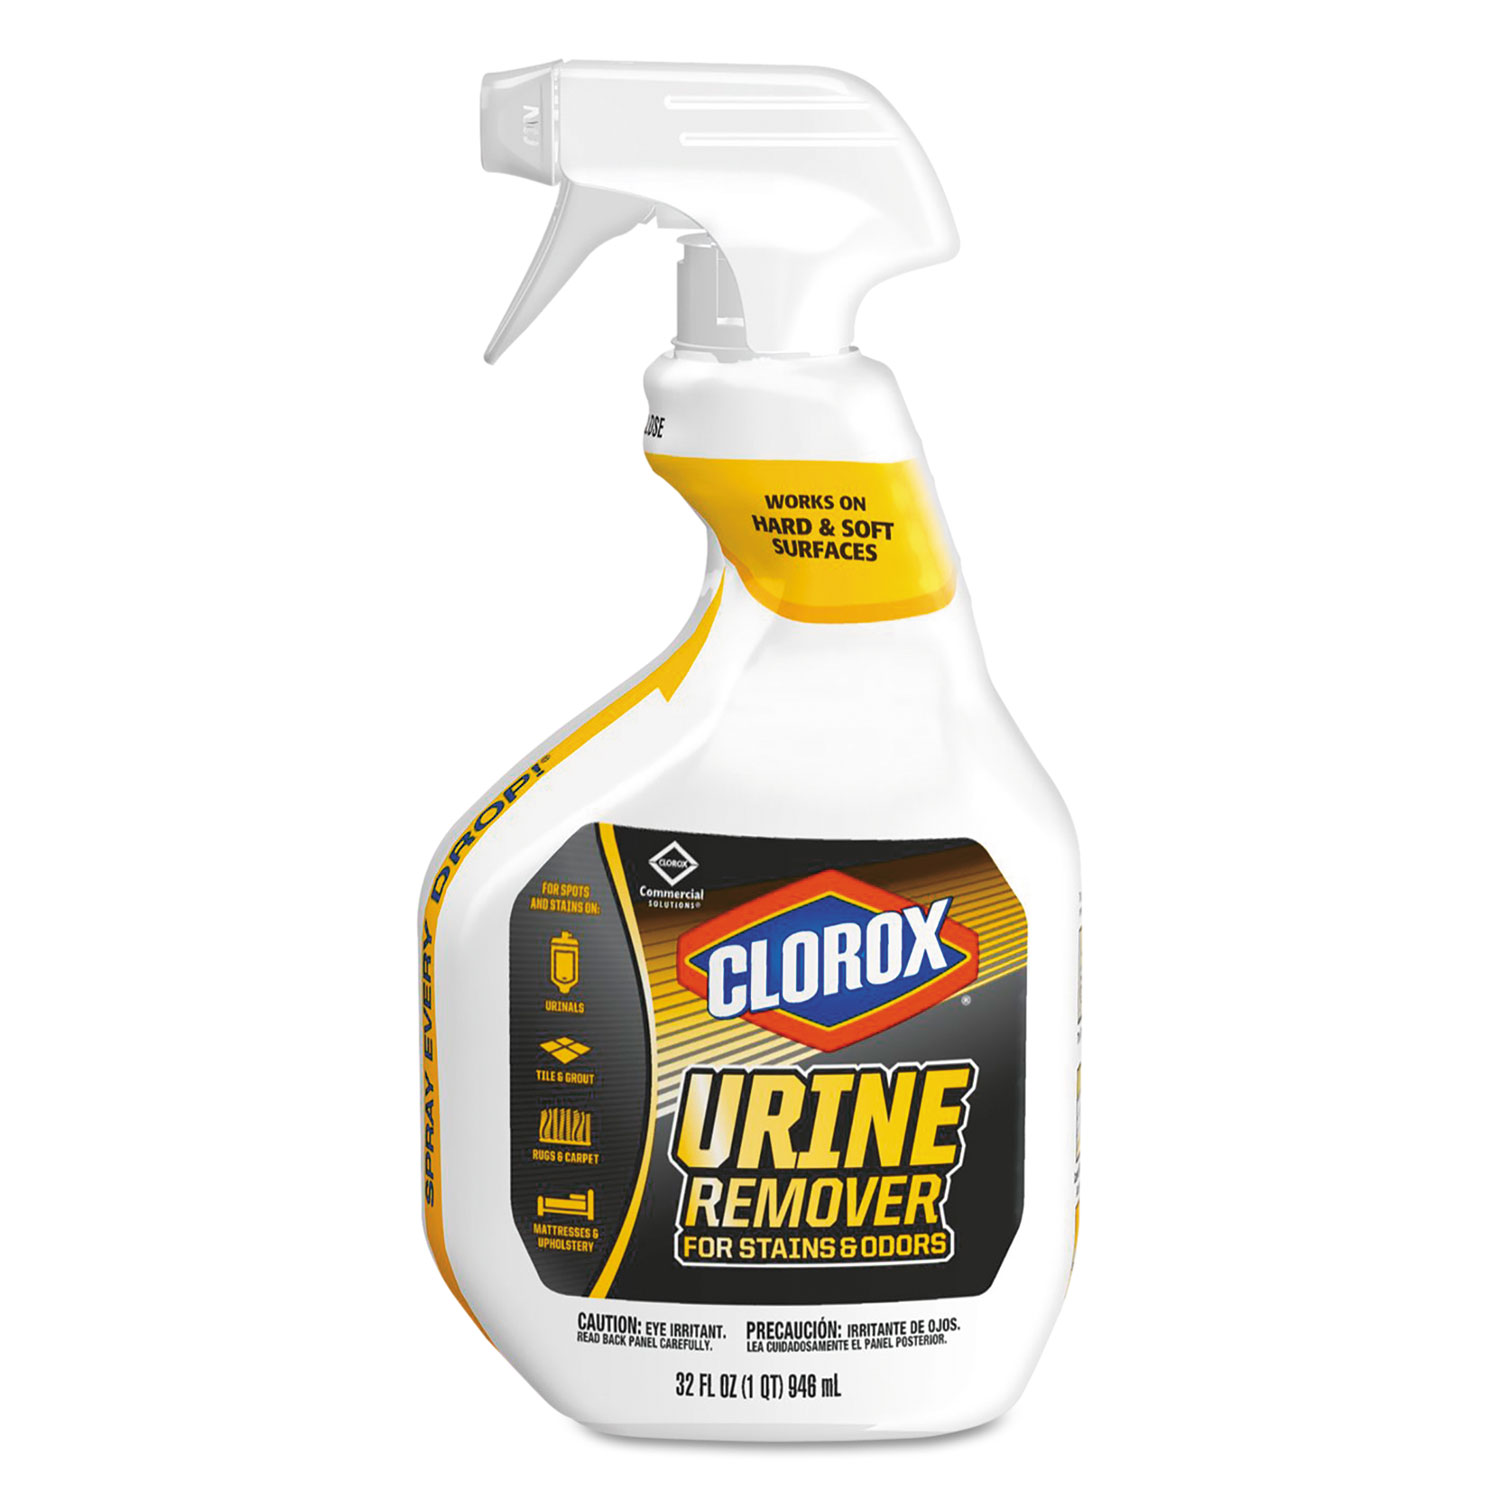  Clorox 31036 Urine Remover for Stains and Odors, 32 oz Spray Bottle (CLO31036) 